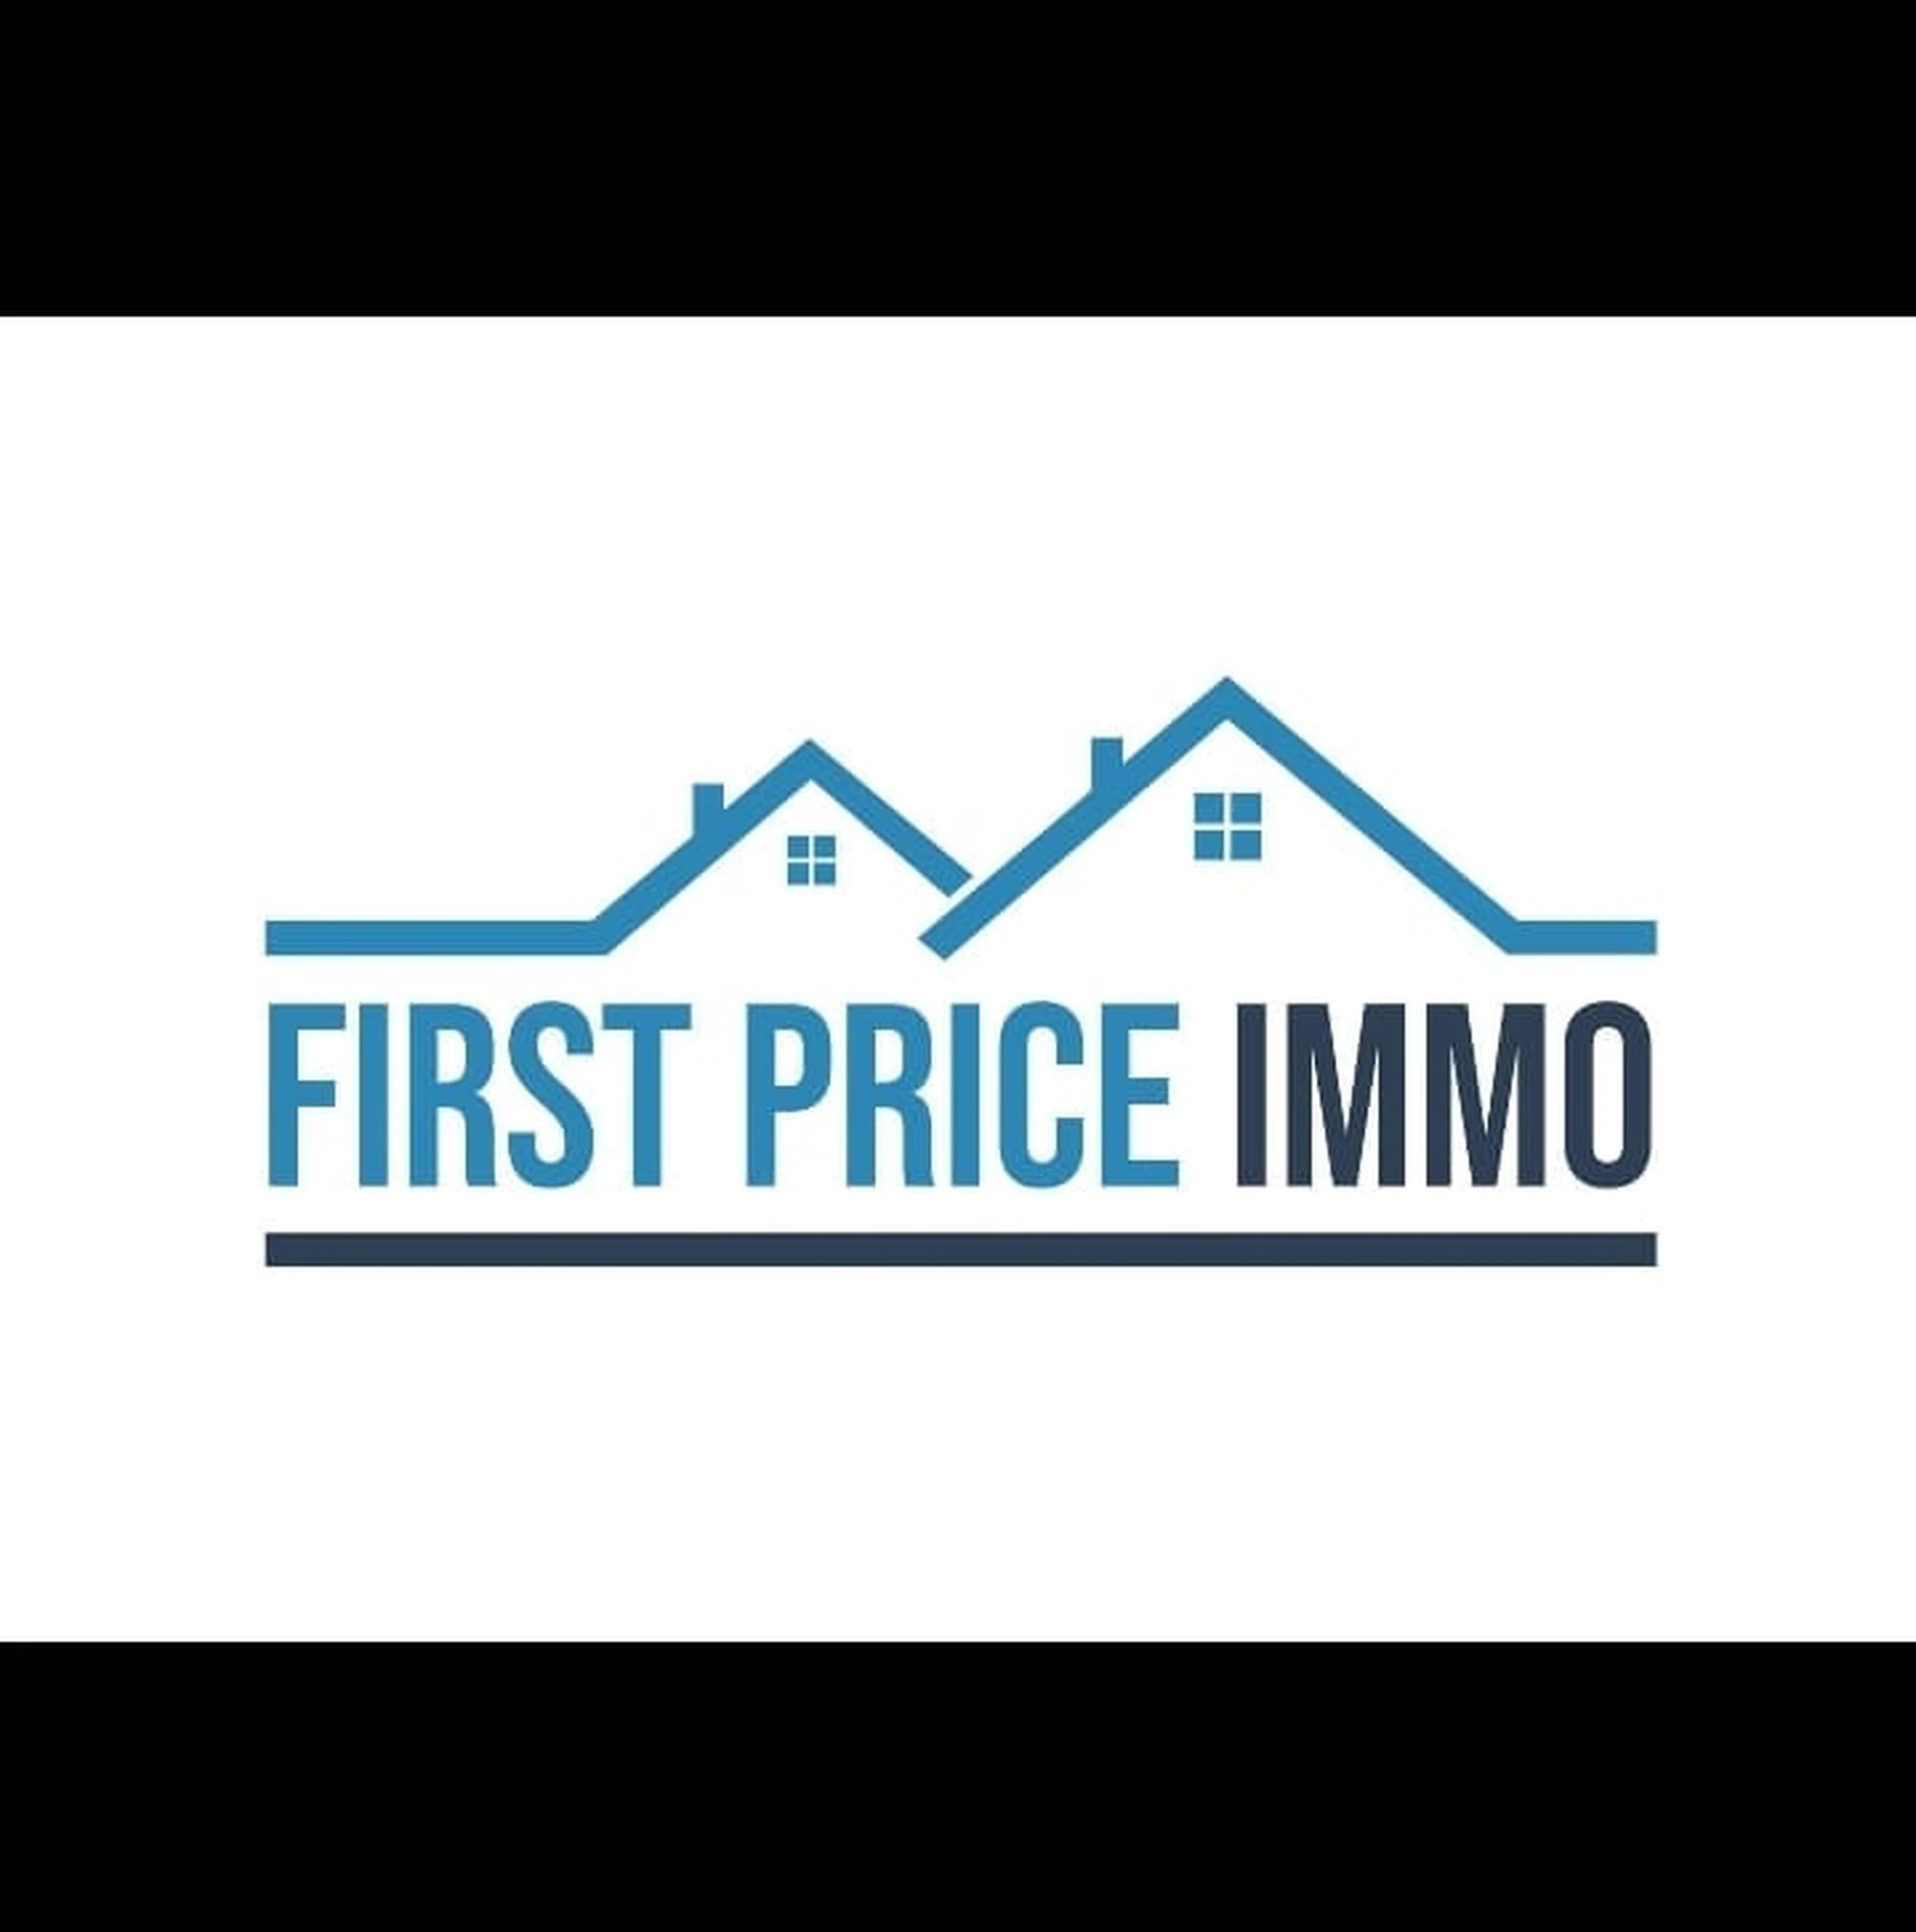 tayara shop cover of First Price Immo